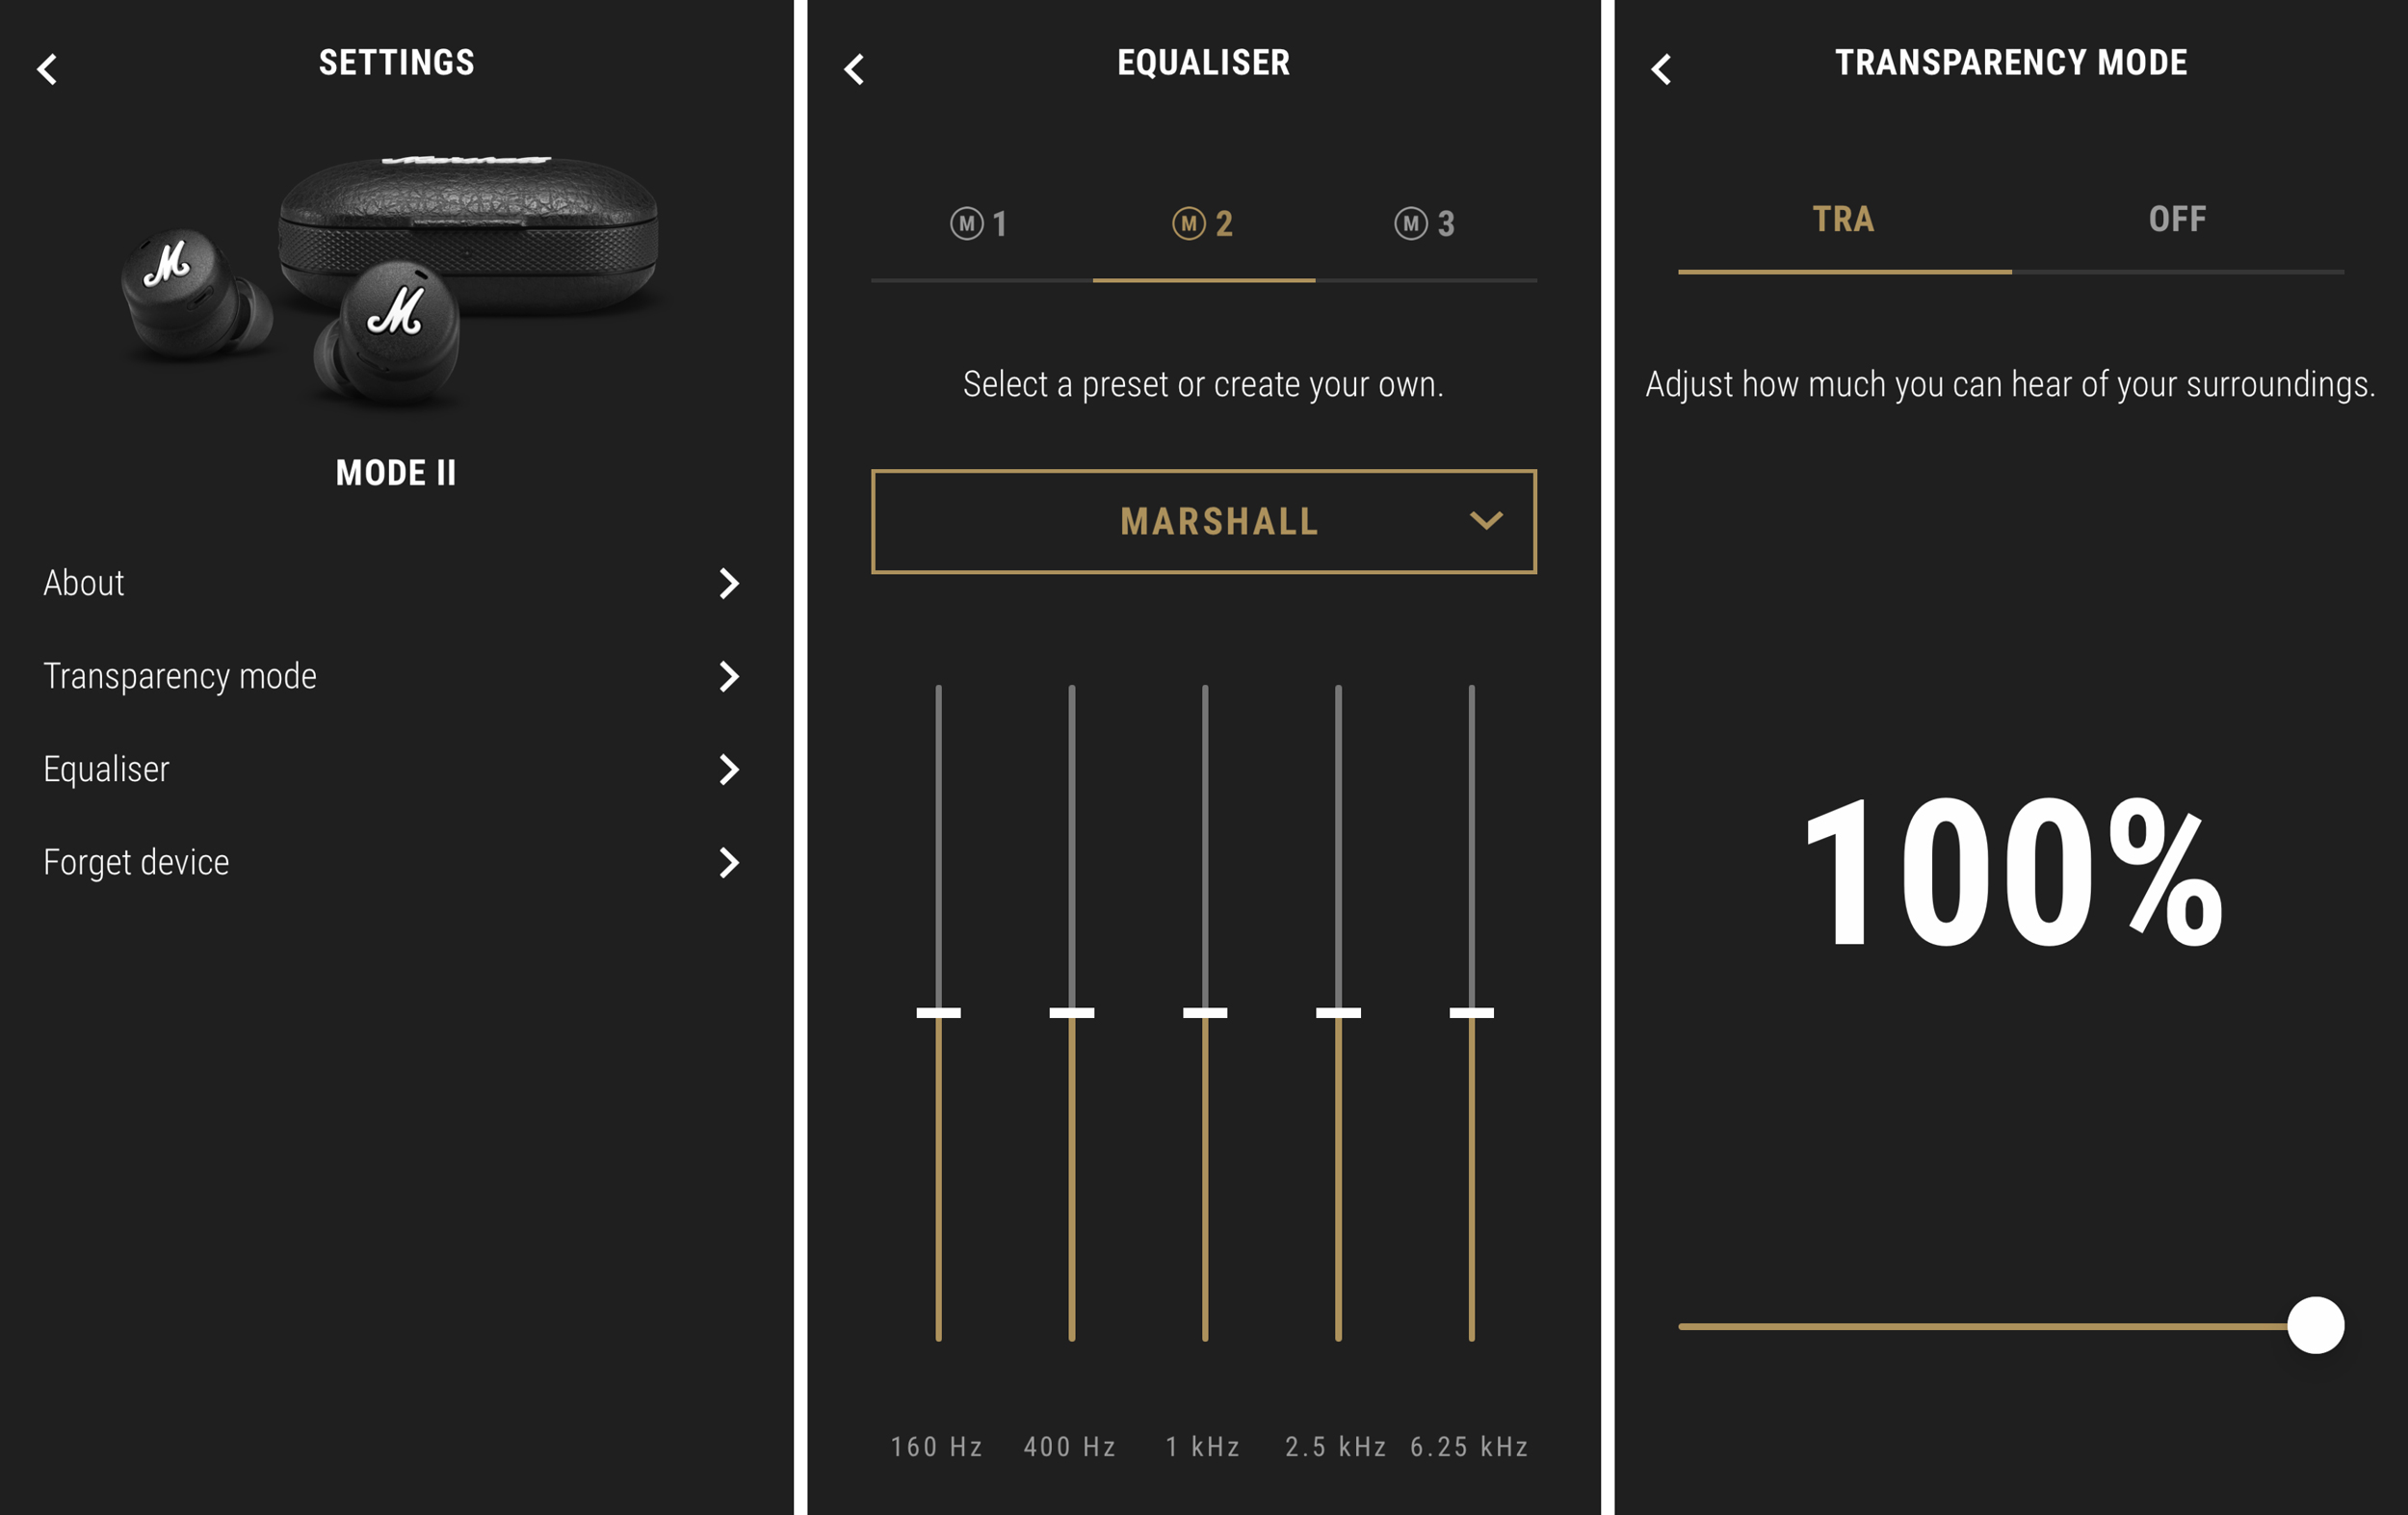 Marshall's app can be used to tweak the sound profile of the Marshall Mode IIs using an adjustable EQ, as well as turn on transparency mode and adjust the level of background noise you'll hear added to your mix. (Screenshot: Andrew Liszewski/Gizmodo)